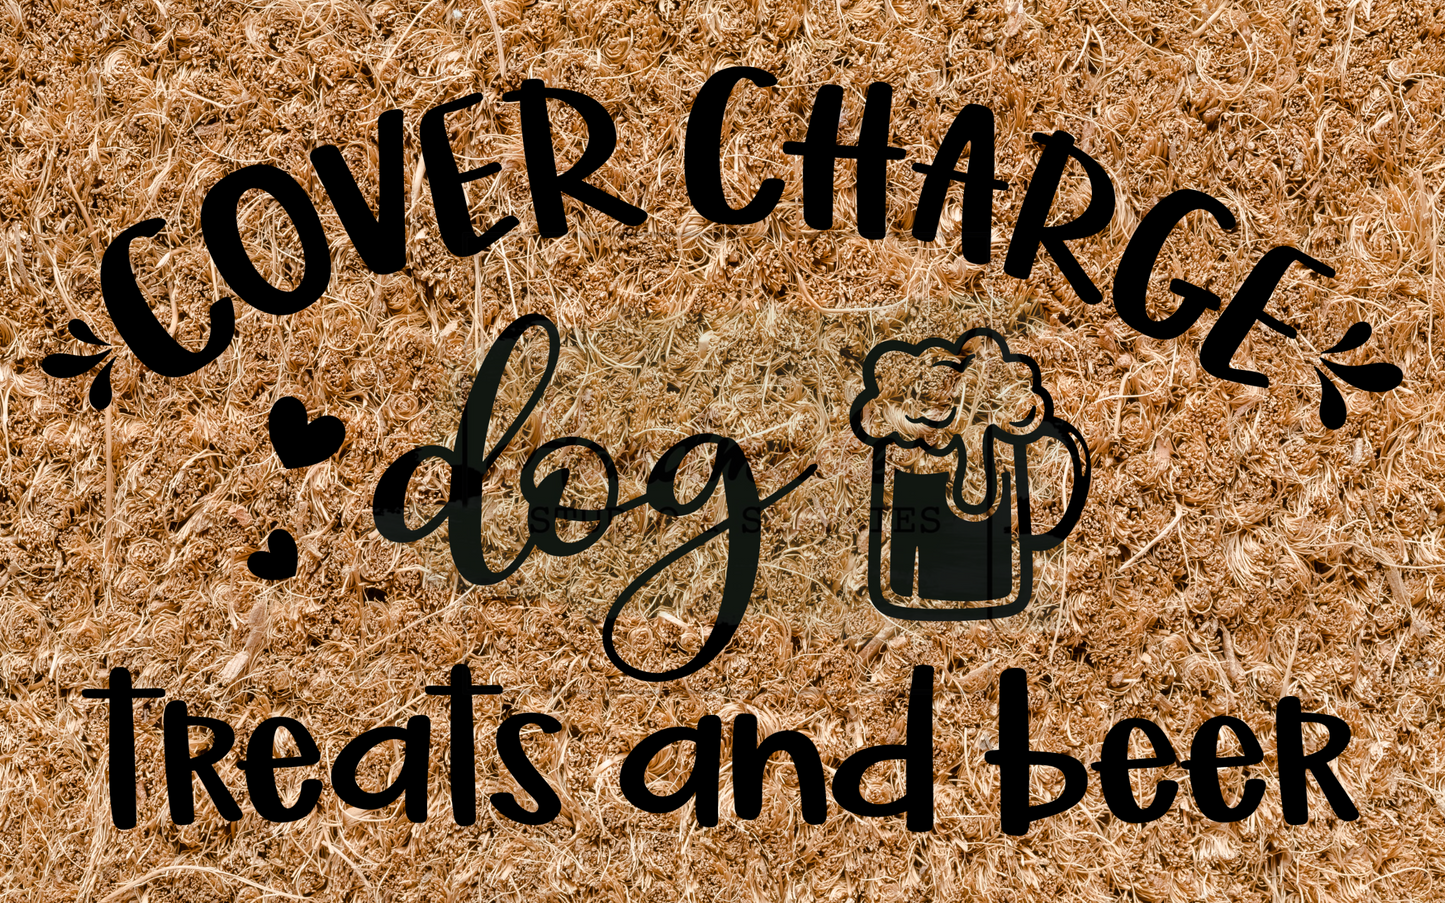 Cover charge - dog treats and beer